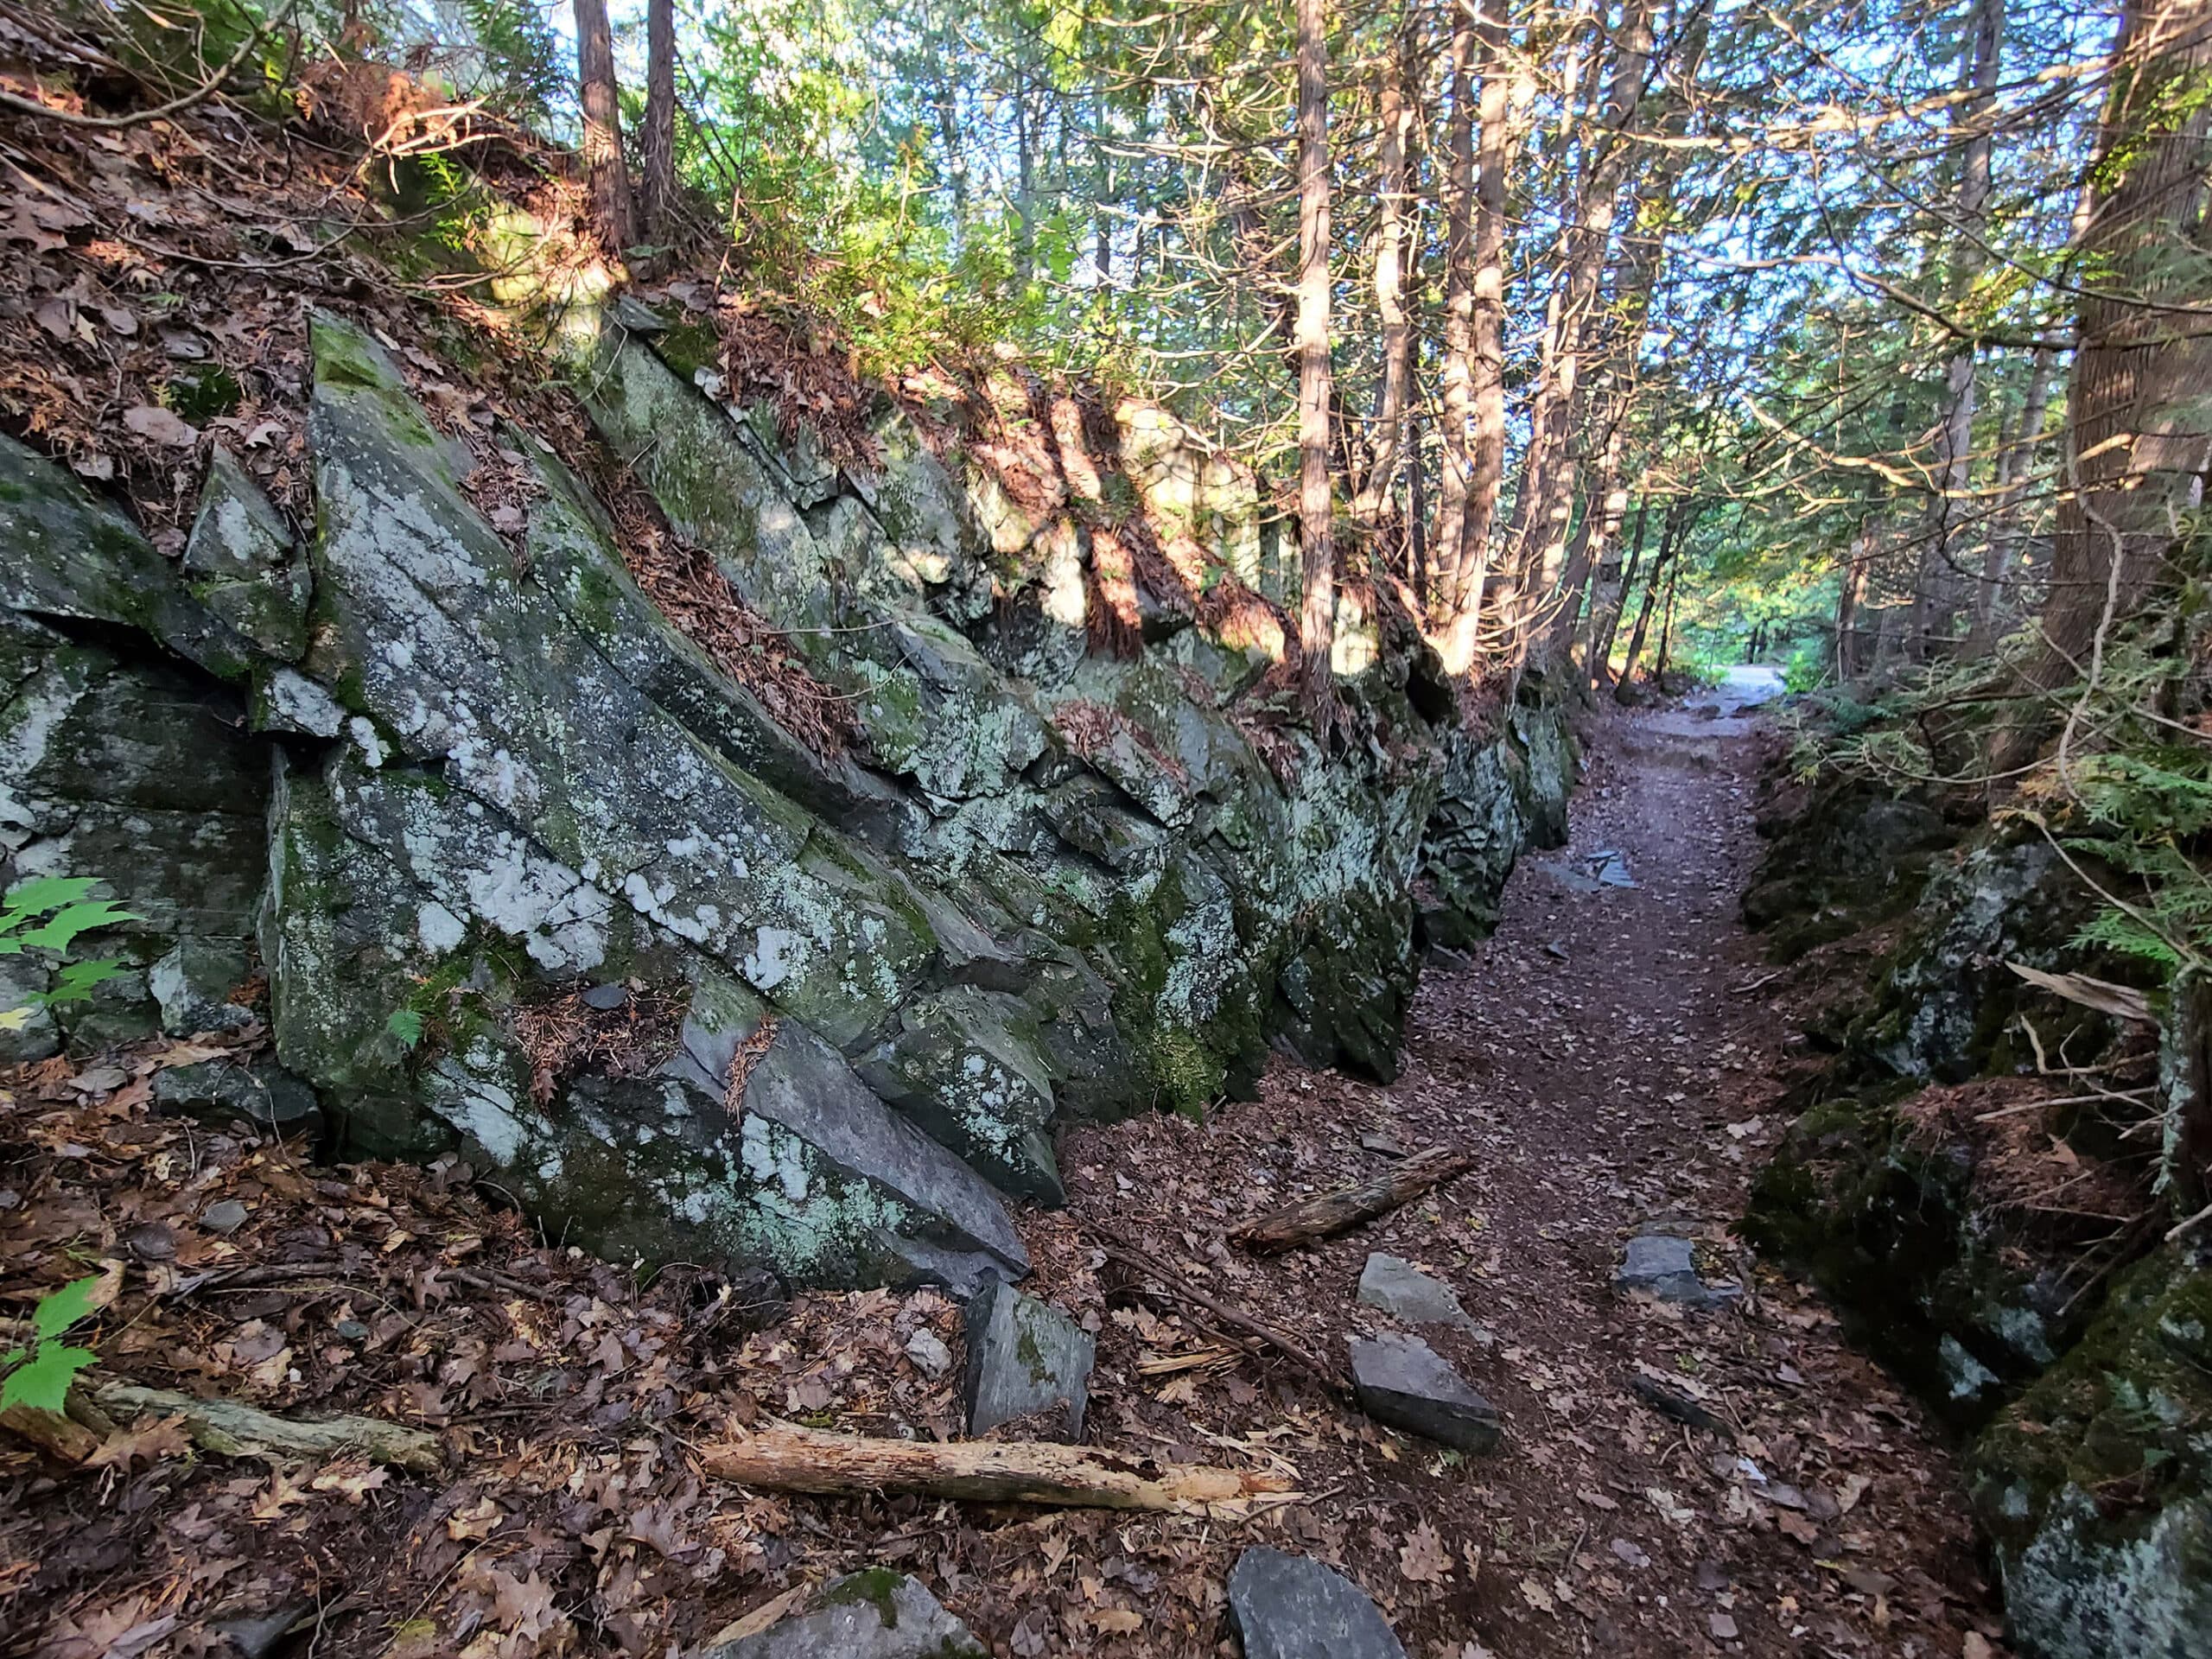 A trail going down into a short ravine.